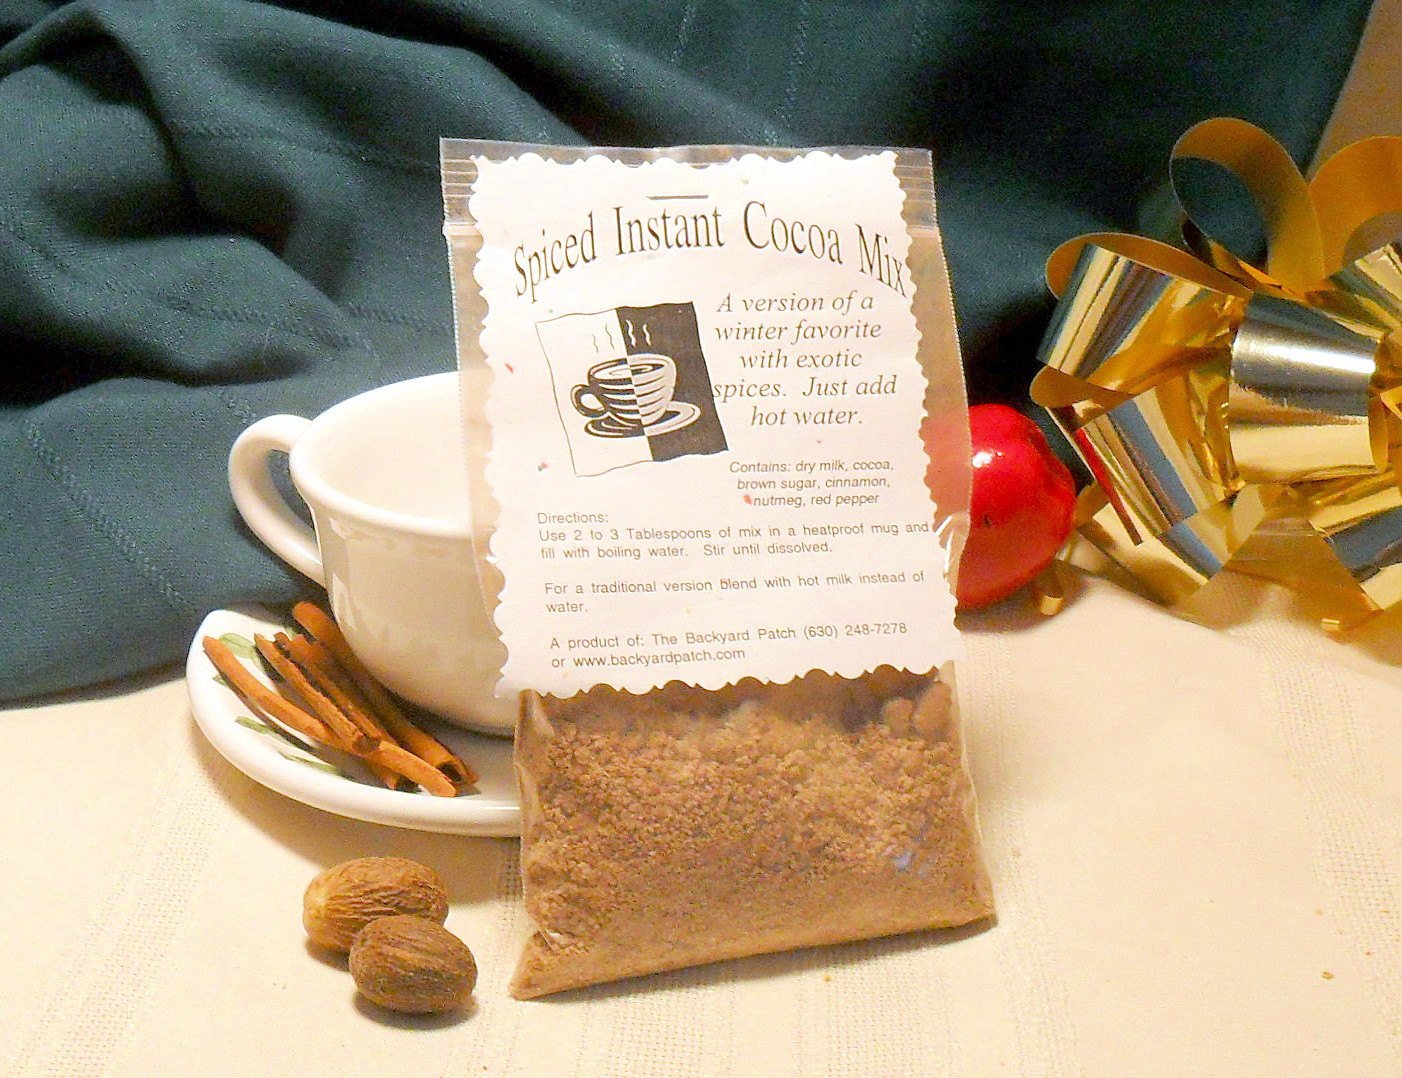 Instant Herbal Hot Chocolate - Cocoa Mixes, set of 2, you choose